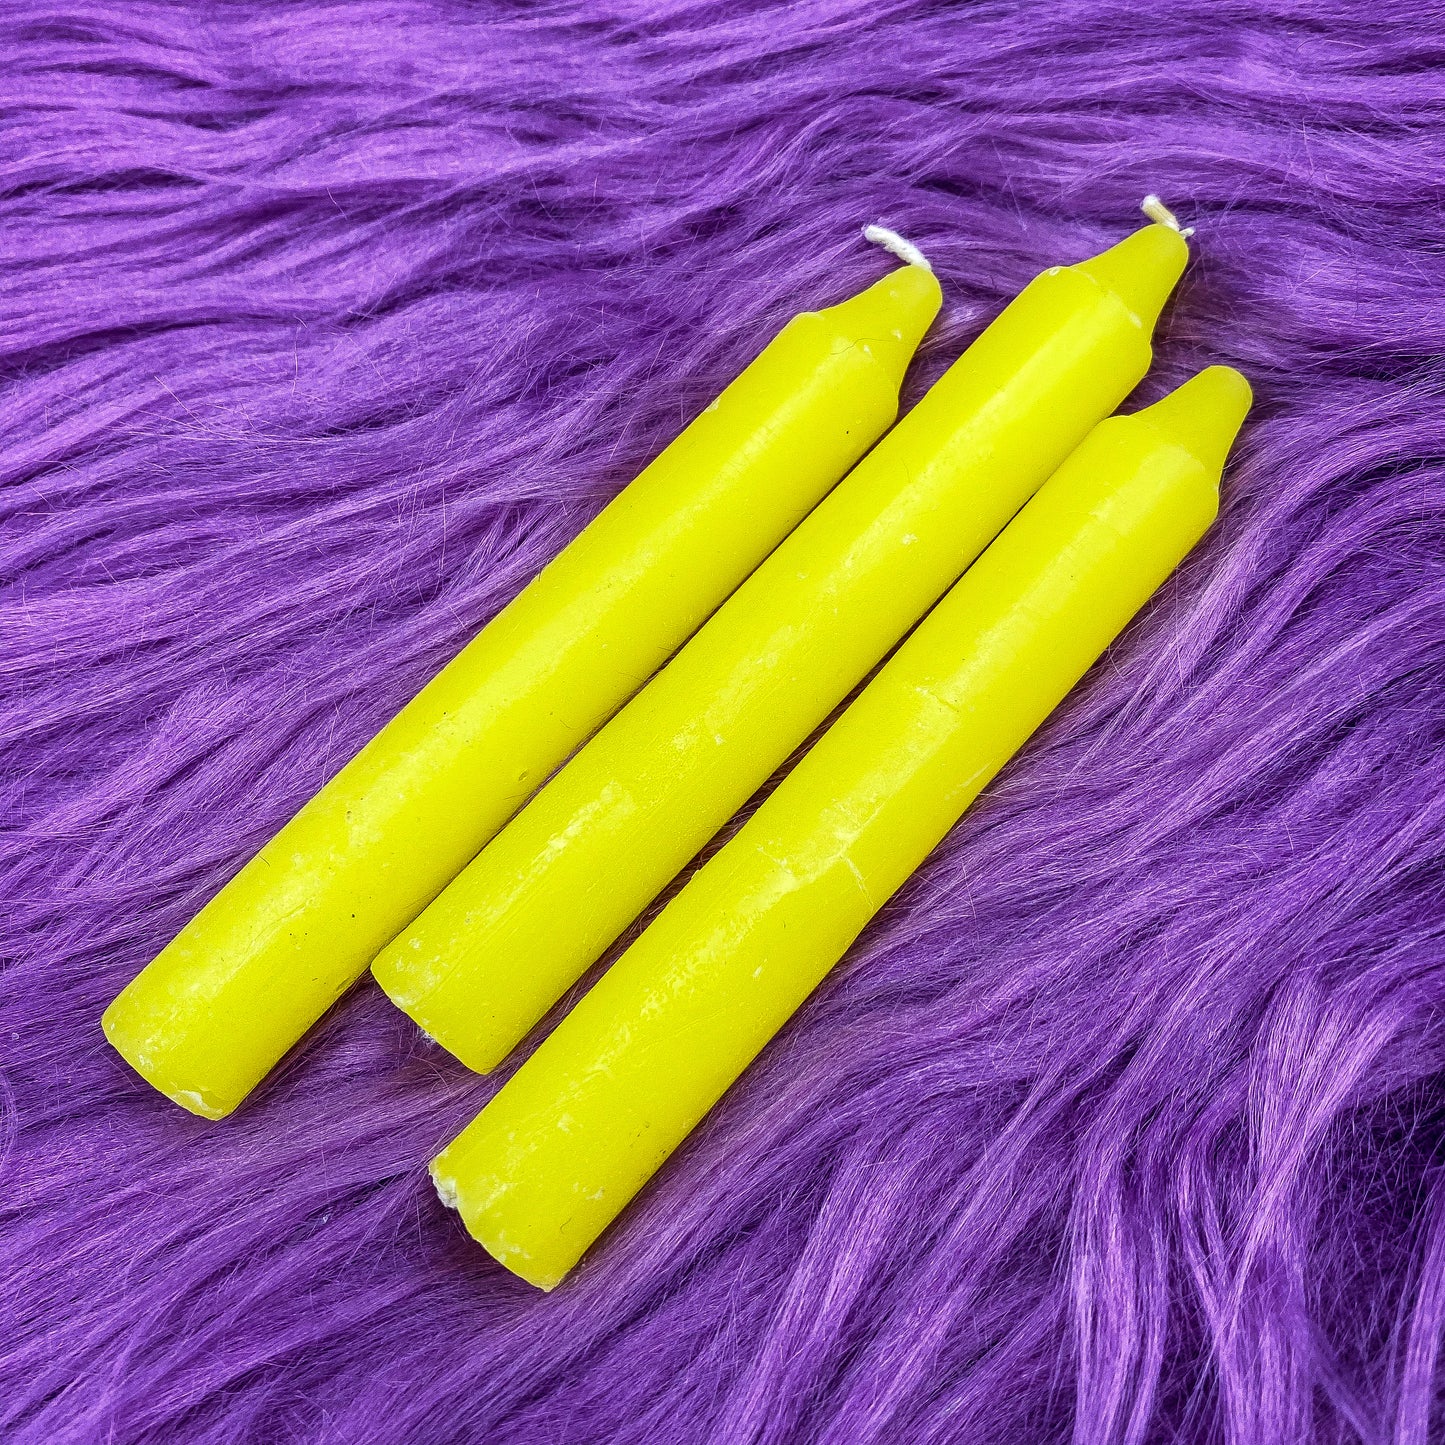 Spell/Chime Candles